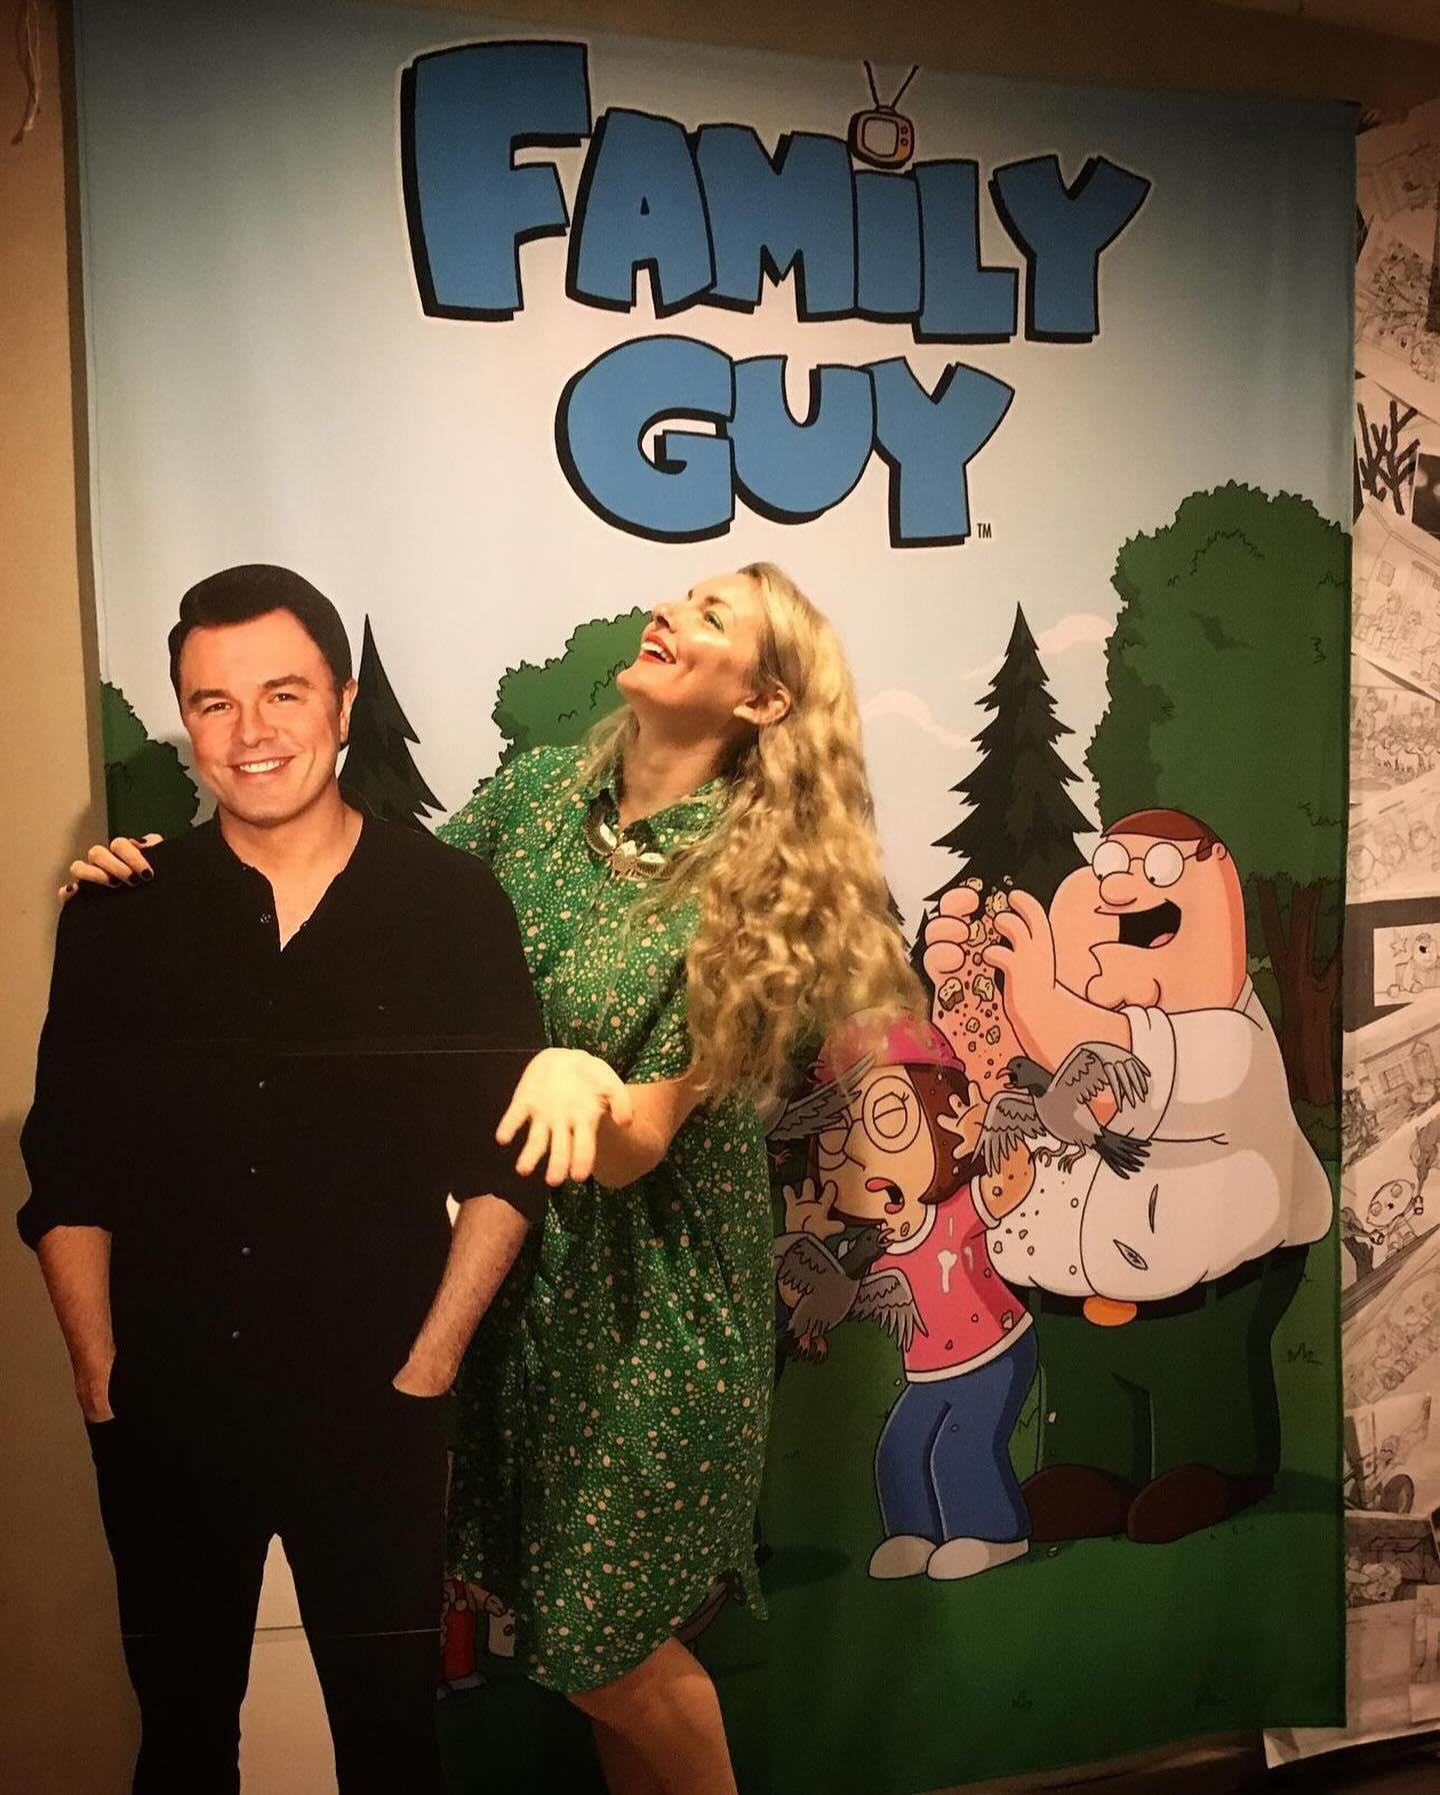 25 years of Family Guy! 🙌🏽 Had to reminisce about having one of my all time dreams come true to attend a Family Guy table read in LA in 2019. Thank you to Kara &amp; Hannah for making it possible. I sat behind the genius that is Gary Janetti and go